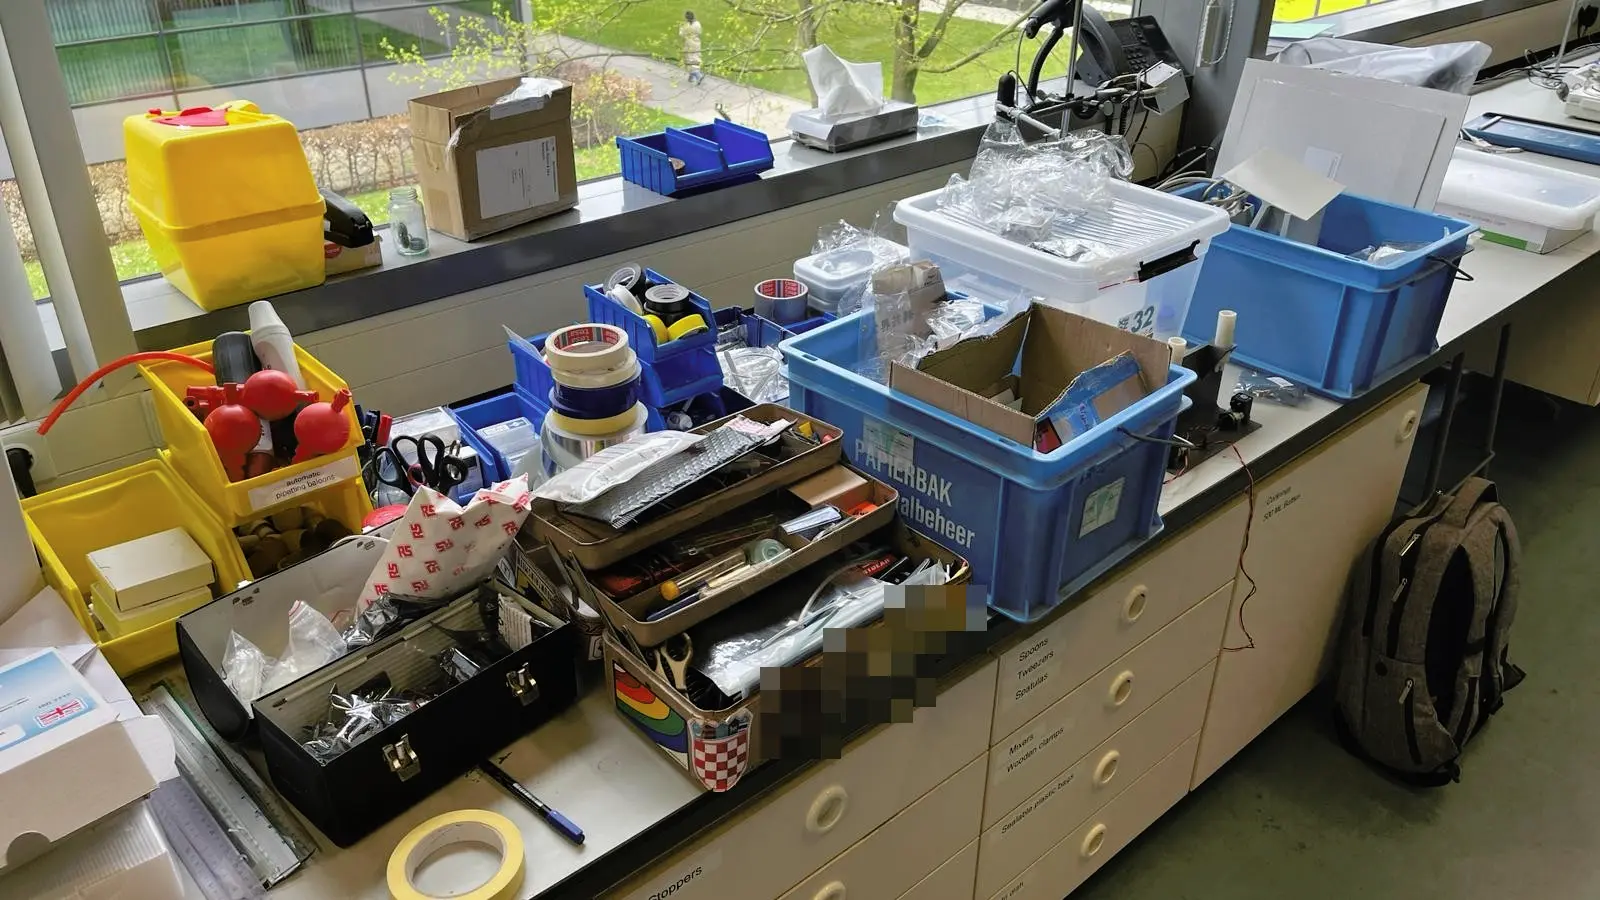 Series of toolboxes and storage containers filled with toolboxes on a laboratory work bench